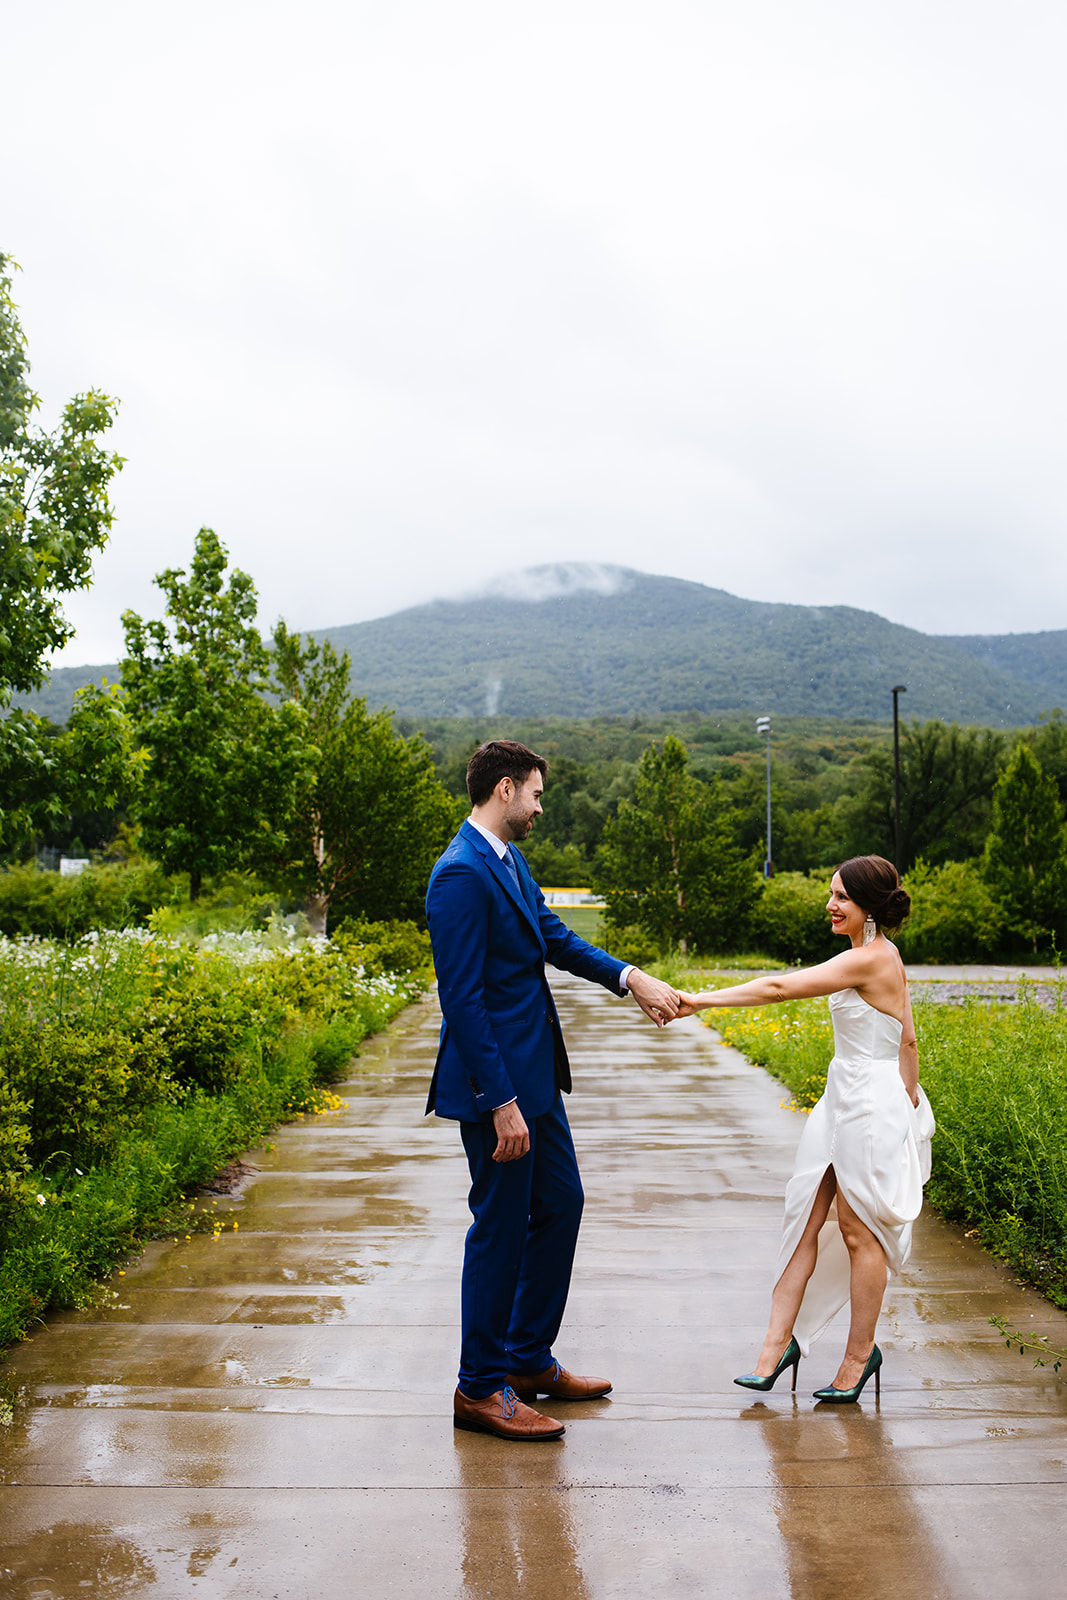 Bride and groom dance in the rain